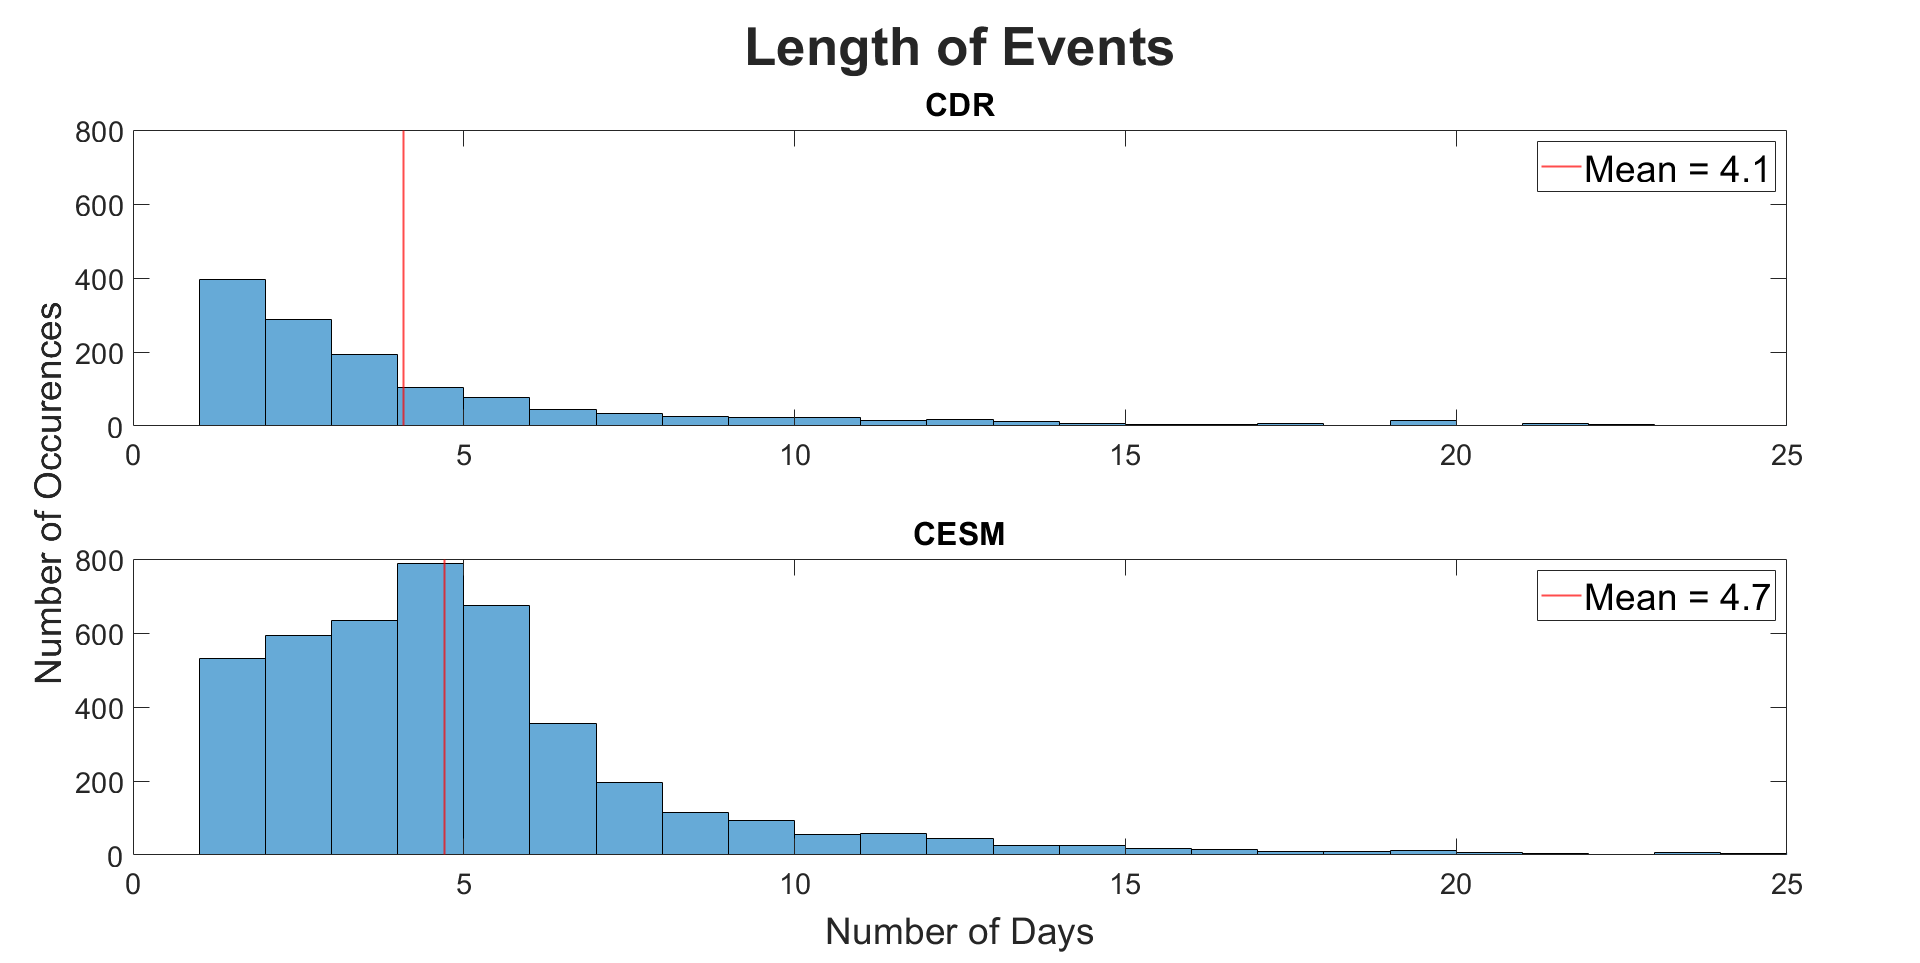 Figure 3. Histogram of the length of all events for one grid cell offshore of each location from the CDR and CESM1‐LE datasets. Pakhachi is not included as there are too few events to analyse. The mean of each distribution is included as a vertical red line.